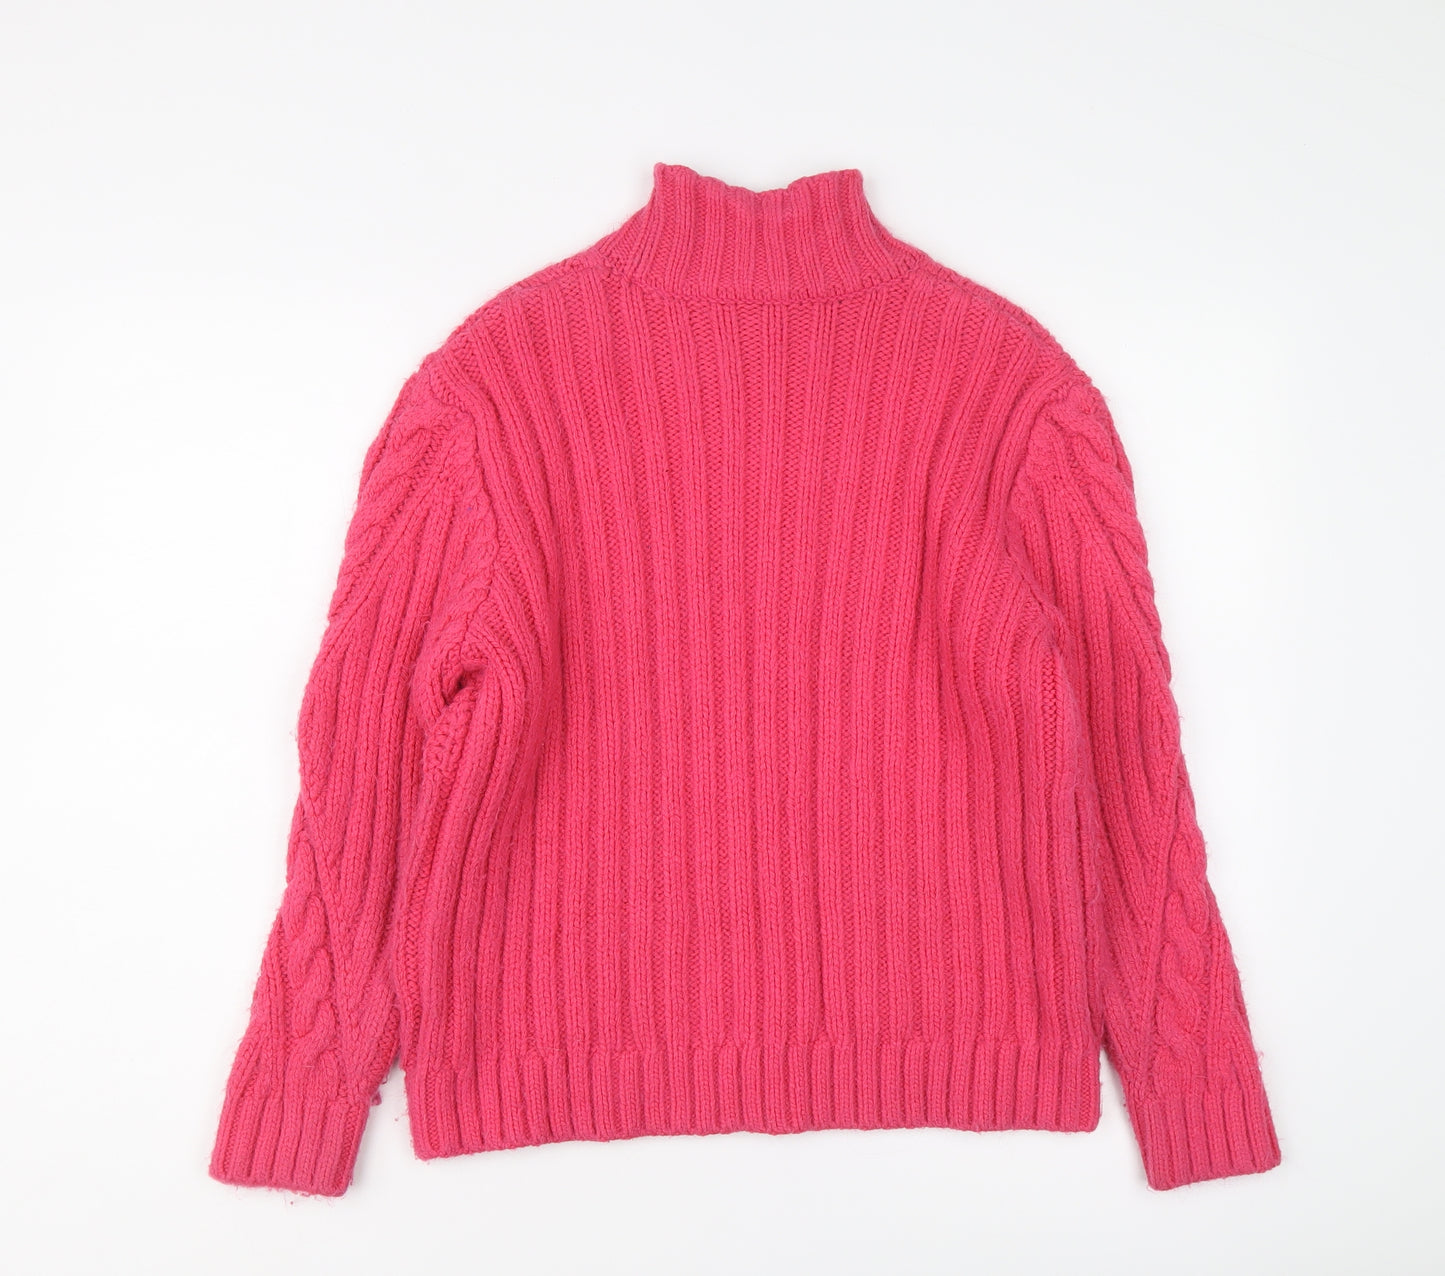 Marks and Spencer Womens Pink High Neck Acrylic Pullover Jumper Size M